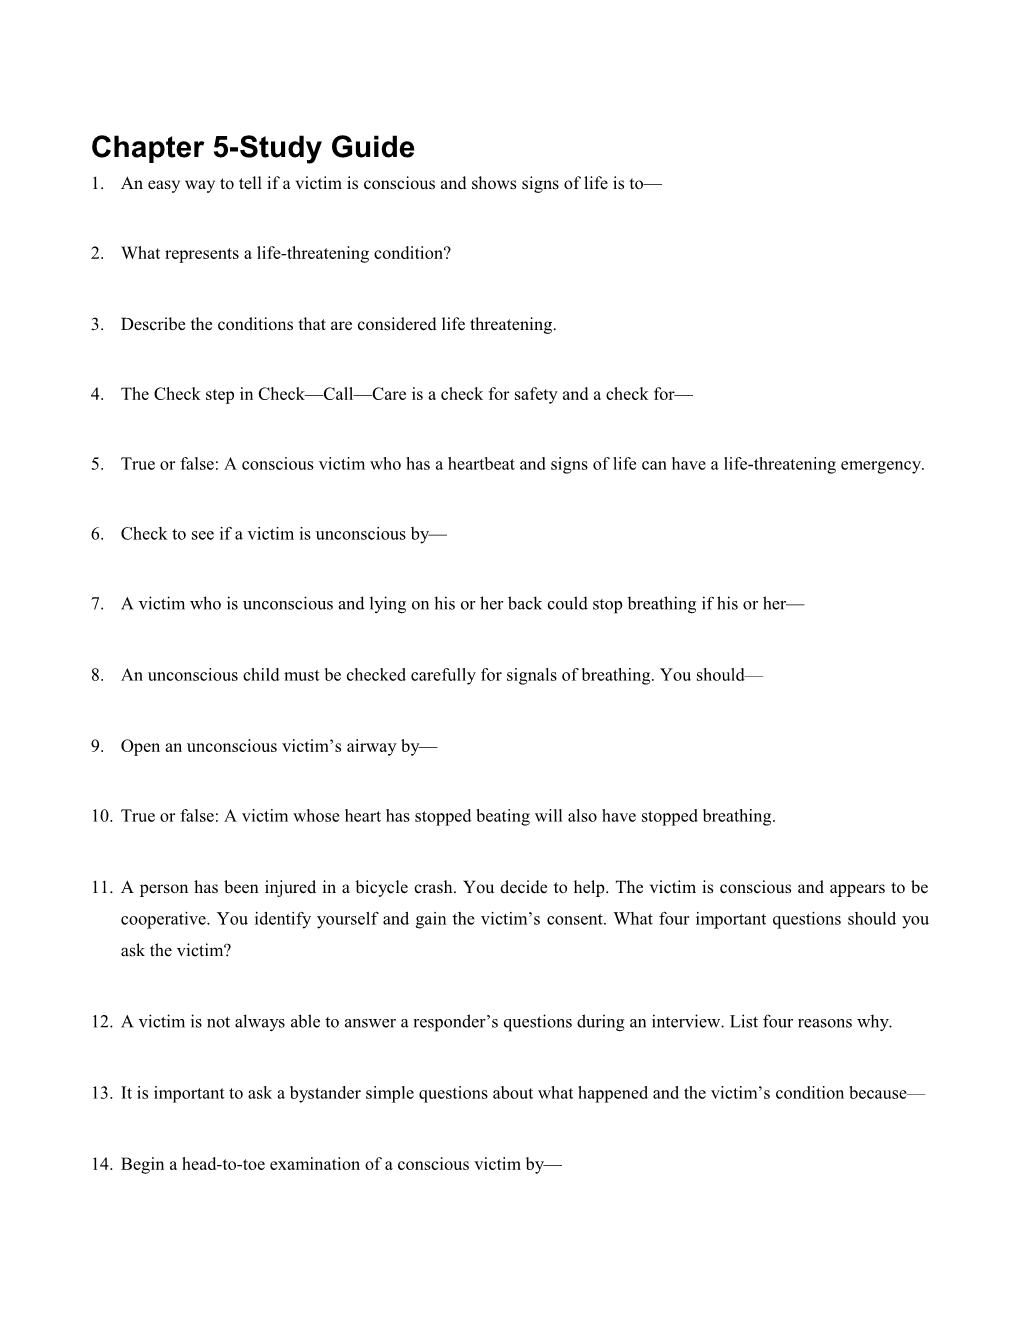 Chapter 5-Study Guide s1